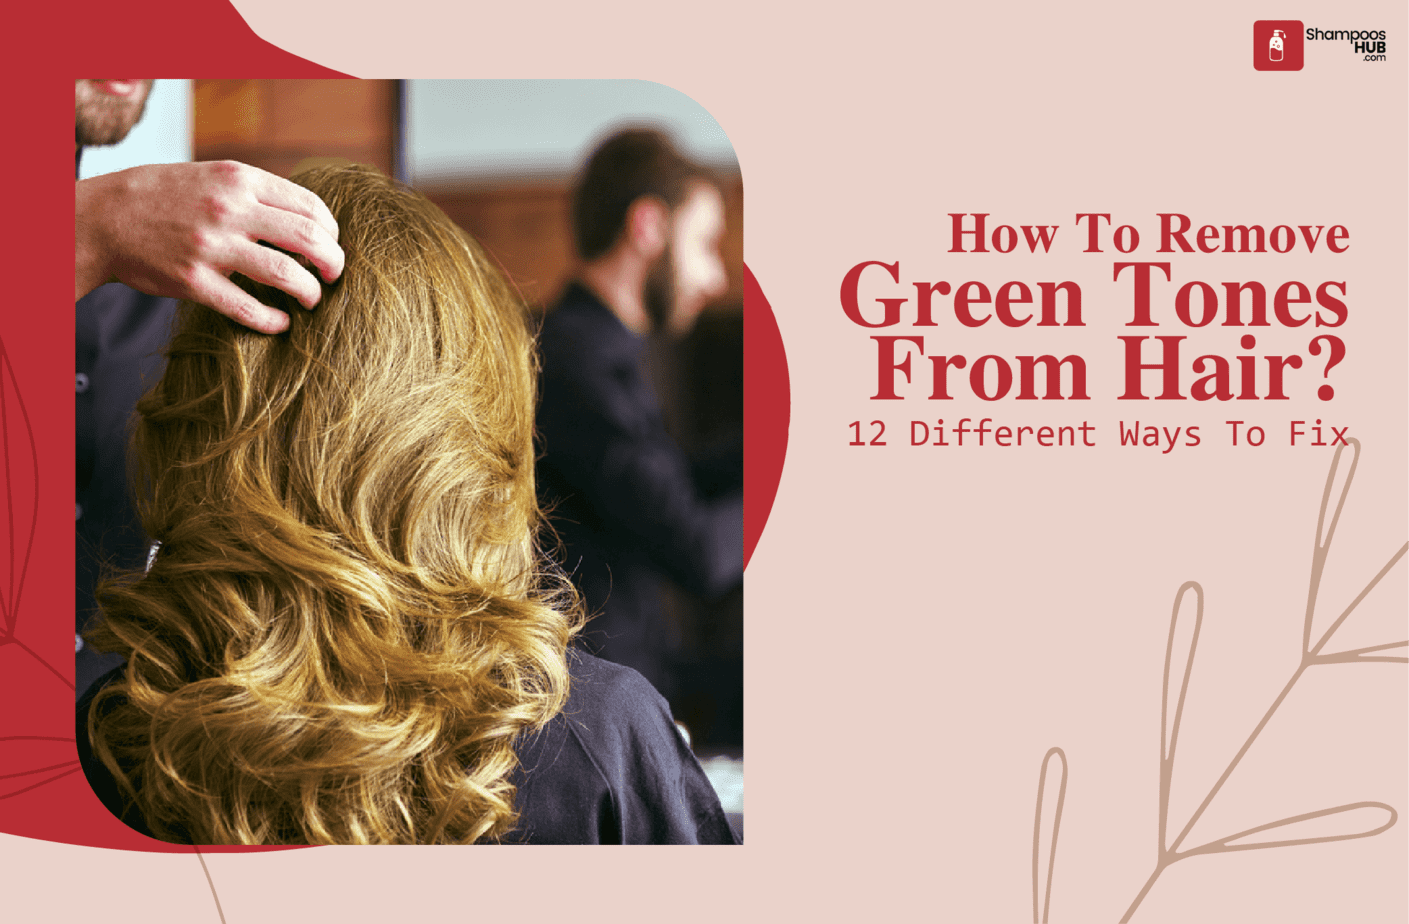 How To Remove Green Tones From Hair?